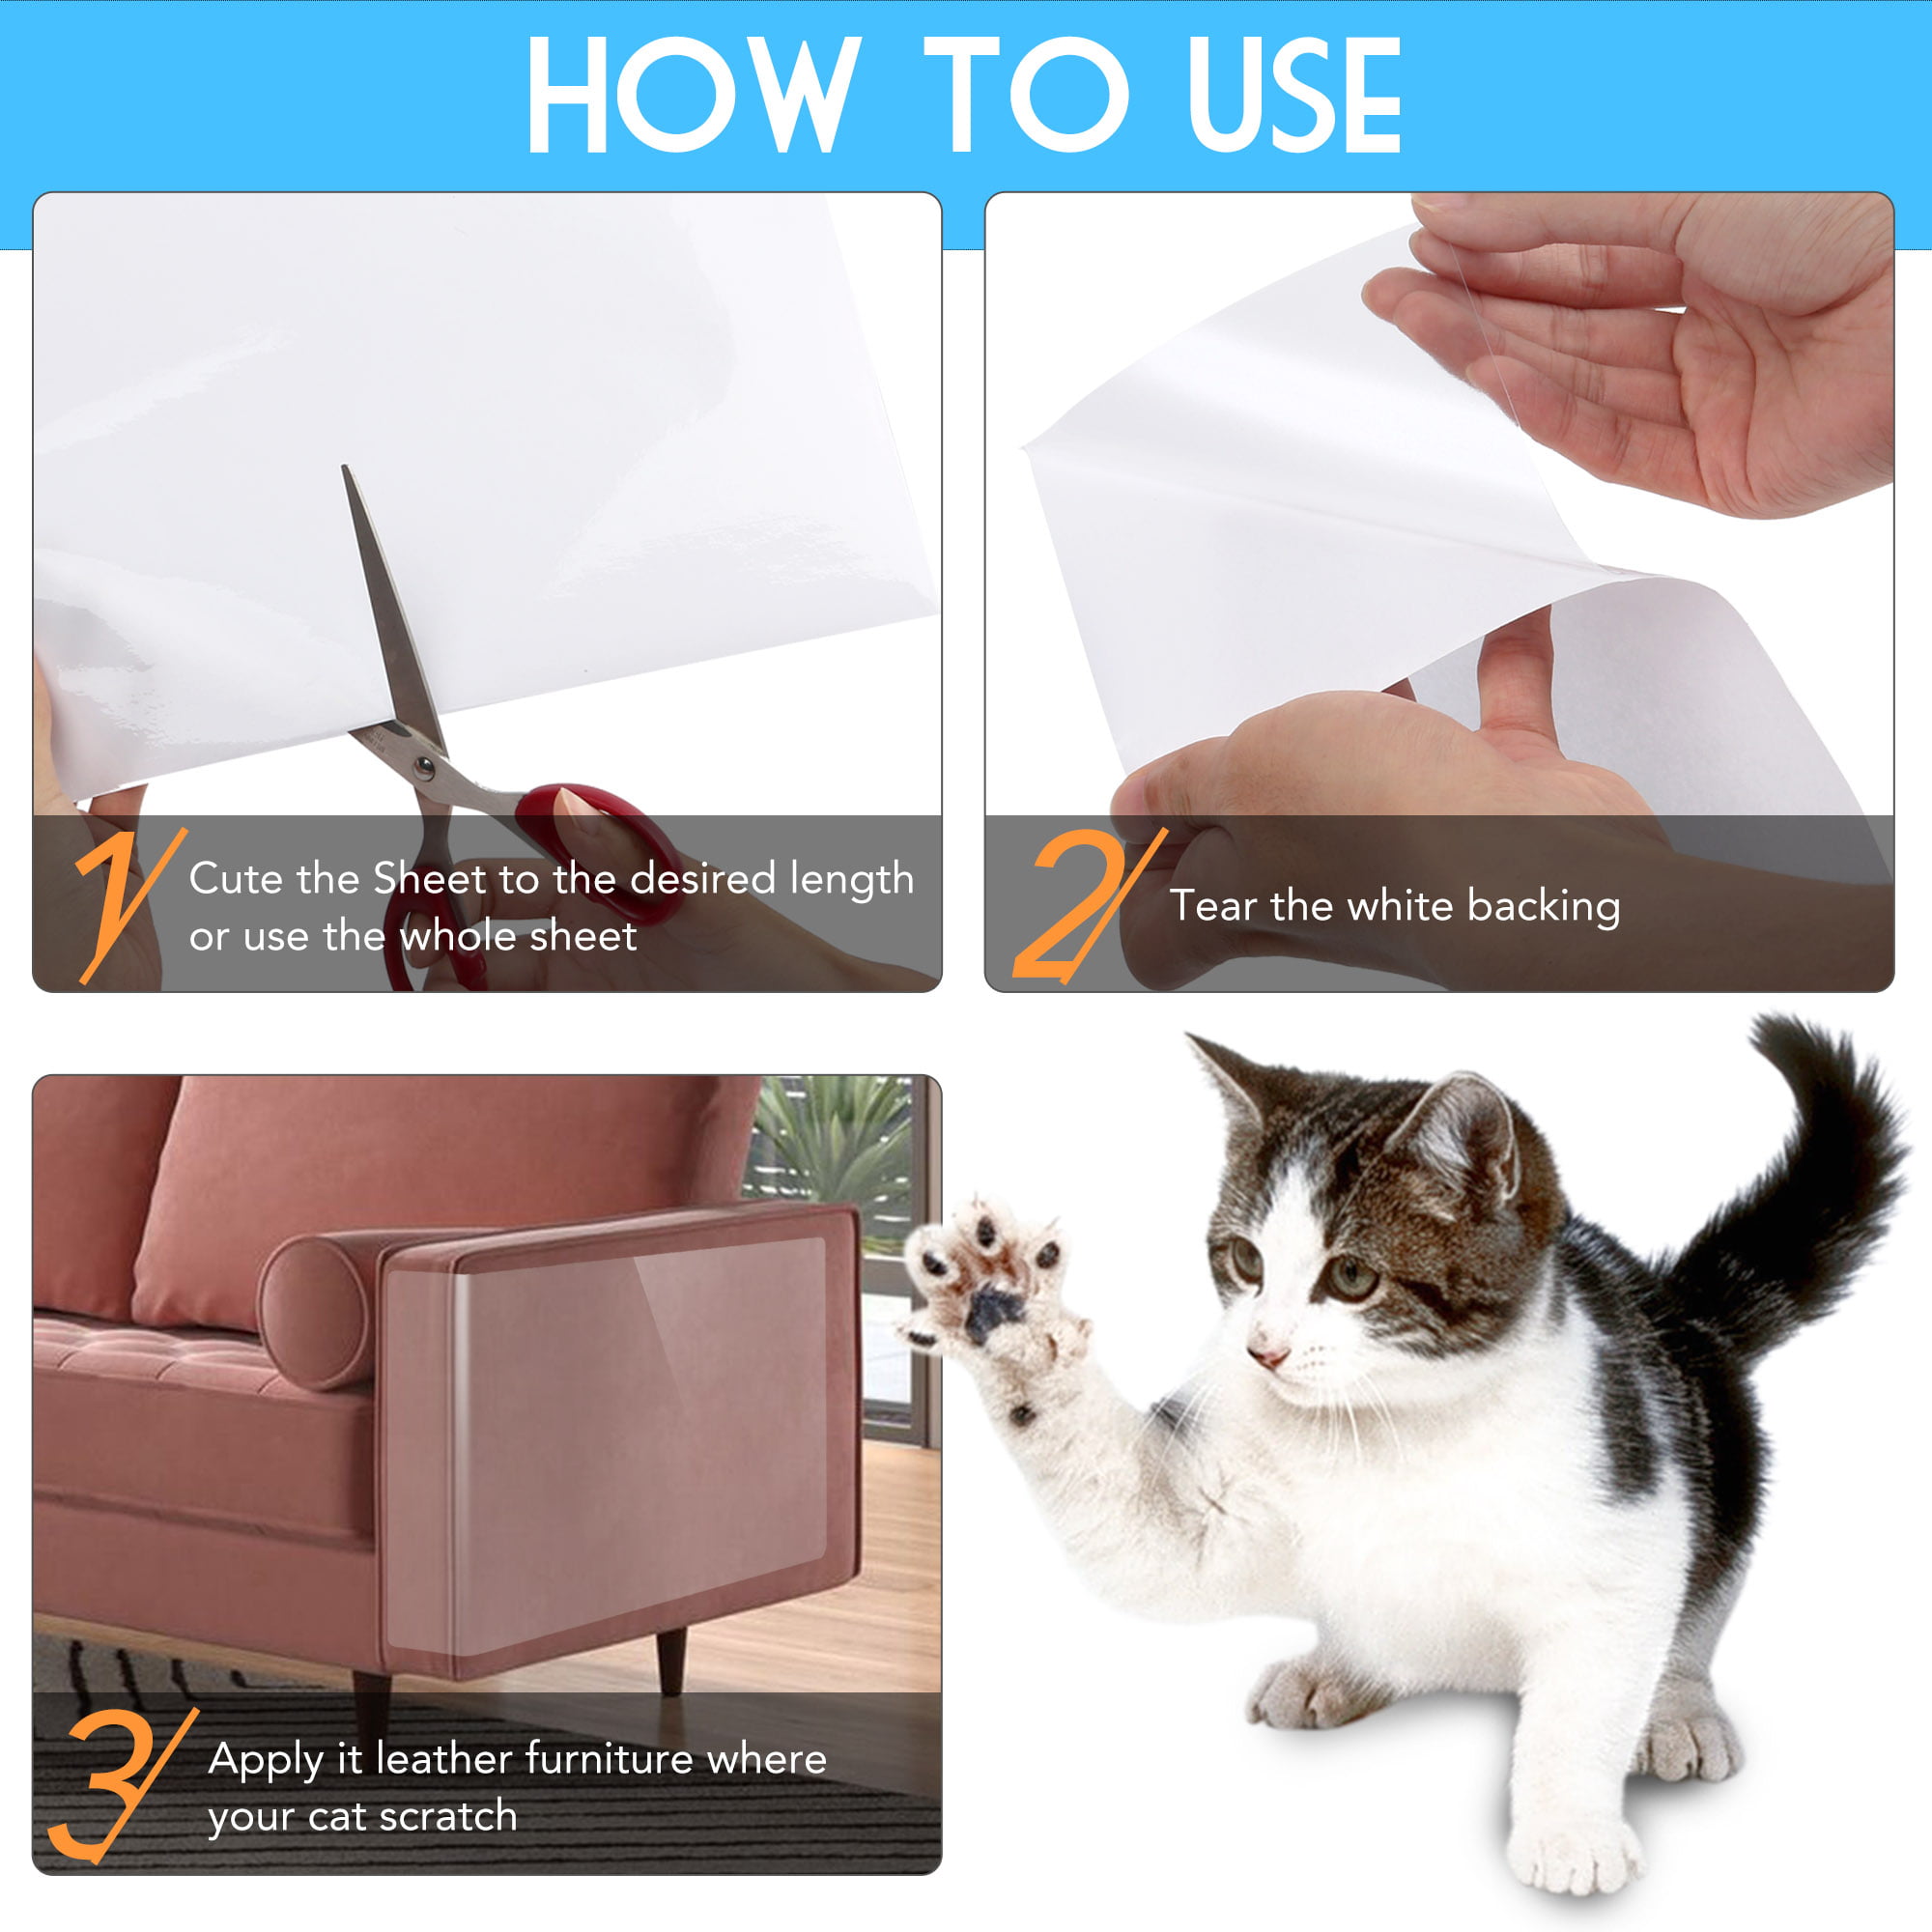 Flexible Clear Cat Furniture Guard with Pins 3 Sizes BUYGOO 8Pcs Cat Scratch Guard Furniture Protector Self Adhesive Cat Scratch Protector for Sofa Furniture Upholstered Chair 